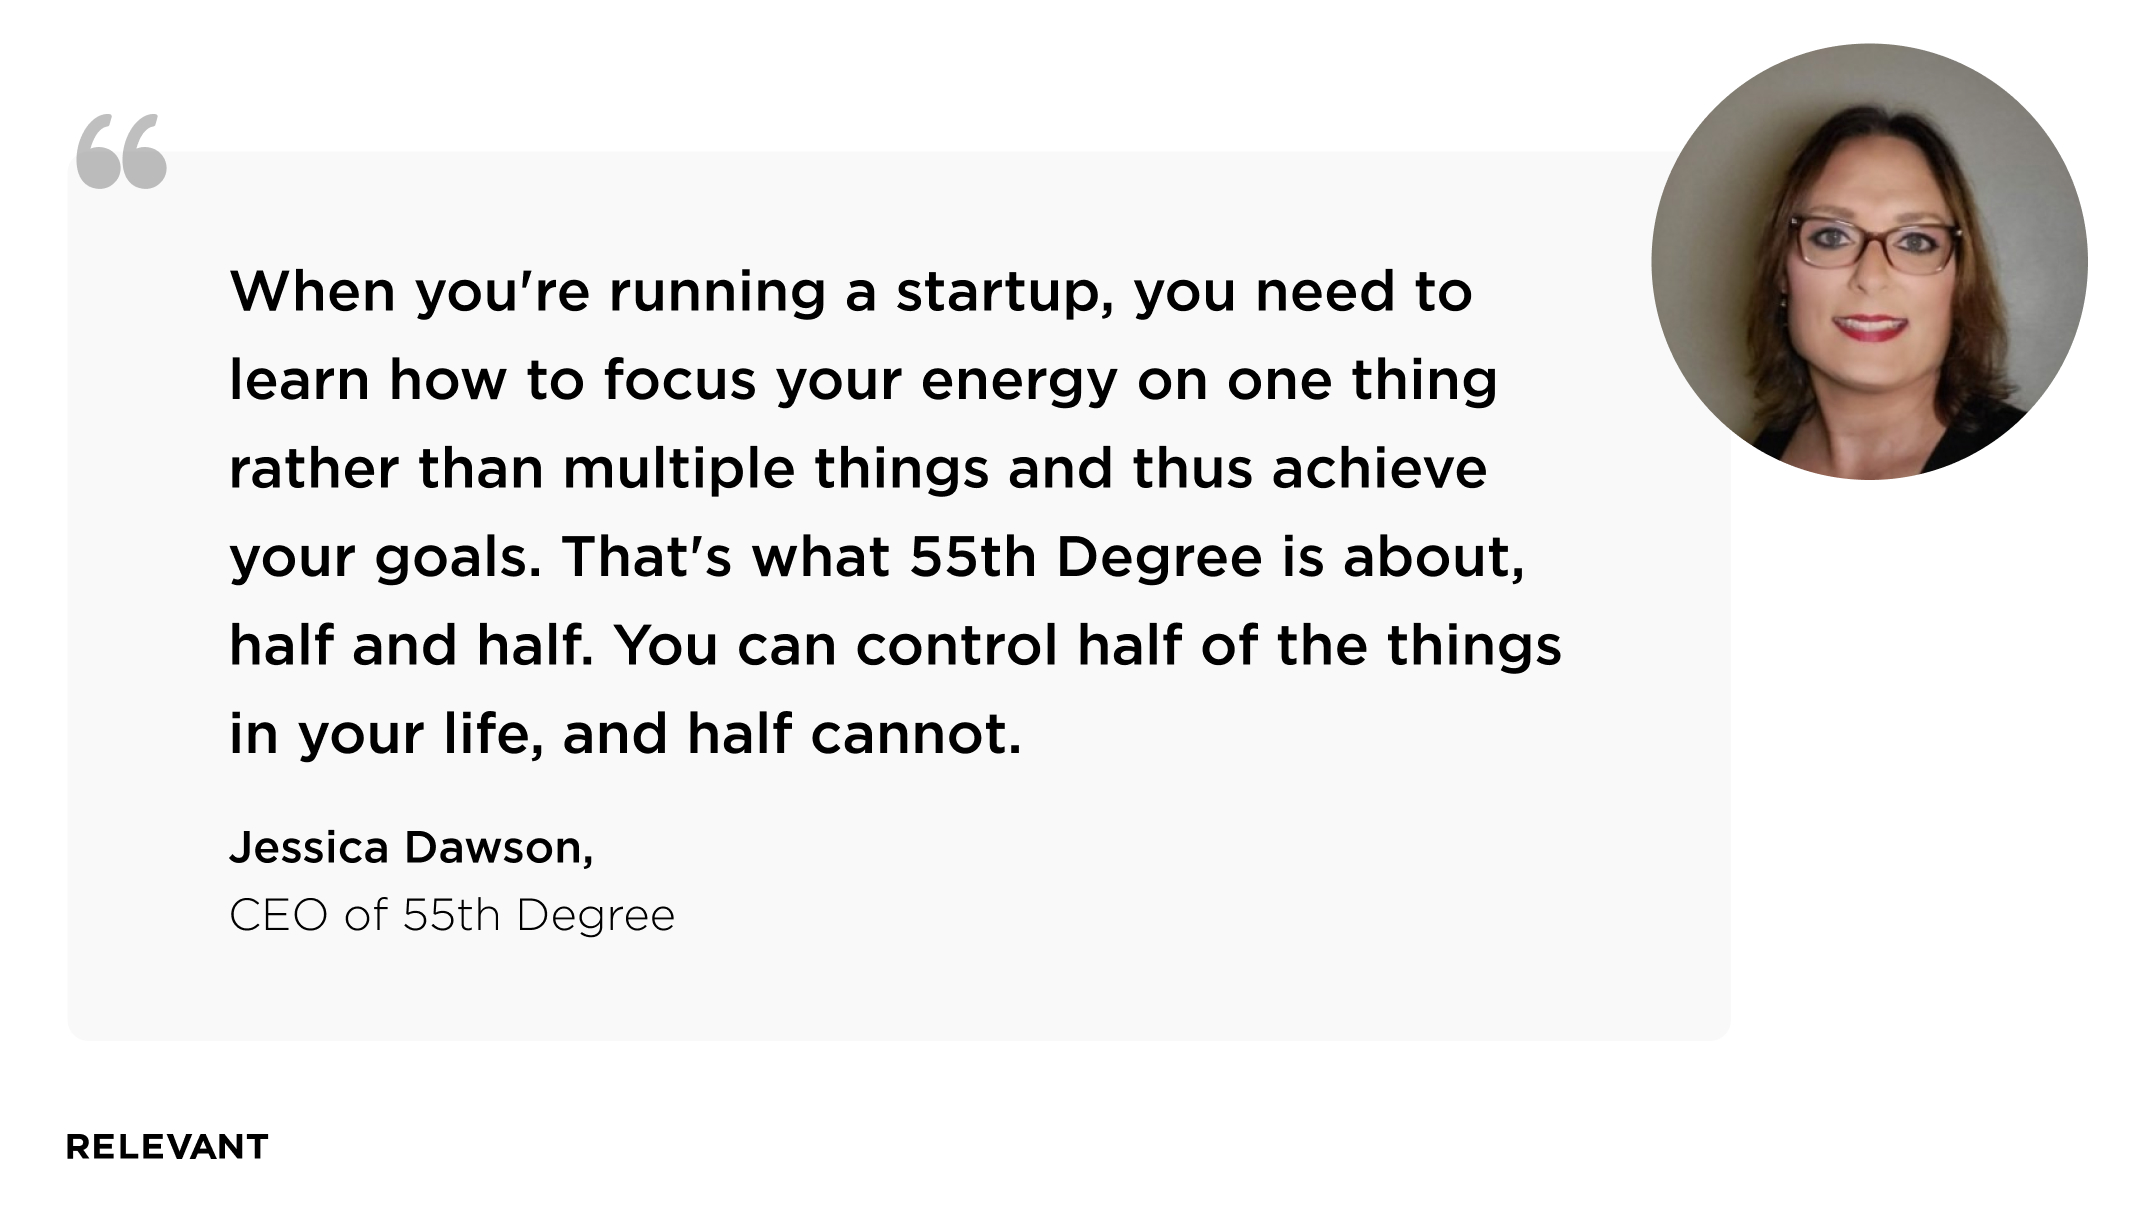 When you're running a startup, you need to learn how to focus your energy on one thing rather than multiple things and thus achieve your goals. That's what 55th Degree is about, half and half. You can control half of the things in your life, and half cannot. Jessica Dawson, CEO of 55th Degree